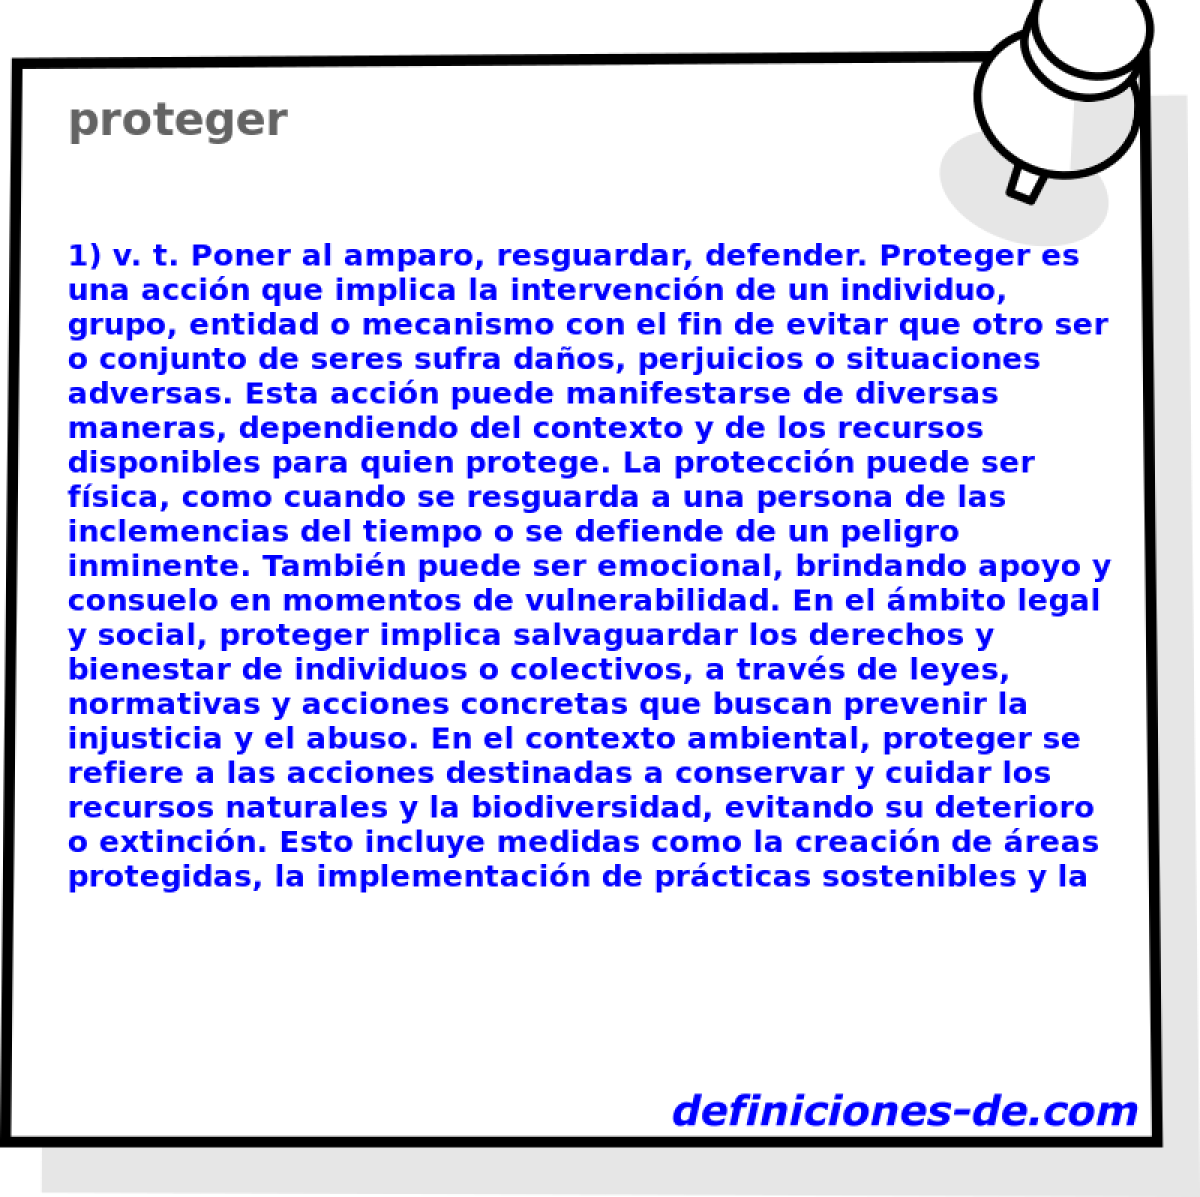 proteger 